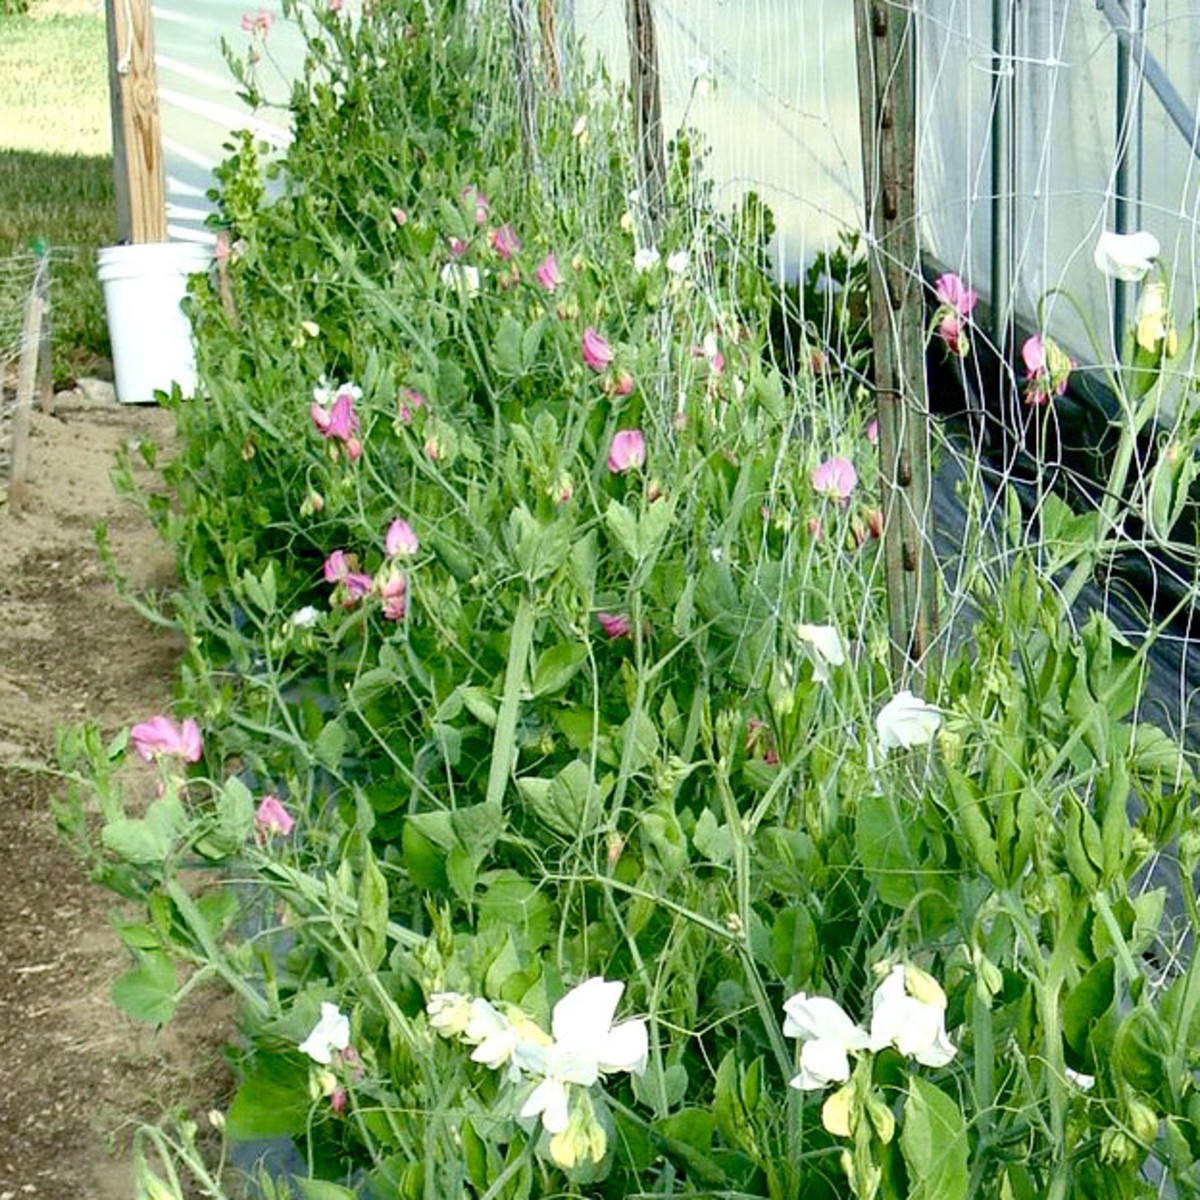 Trellises for peas and sweet peas can be simply made from stakes and thick twine. You can also use chicken wire or fencing wire, but the easiest support to make is firmly attached twine.